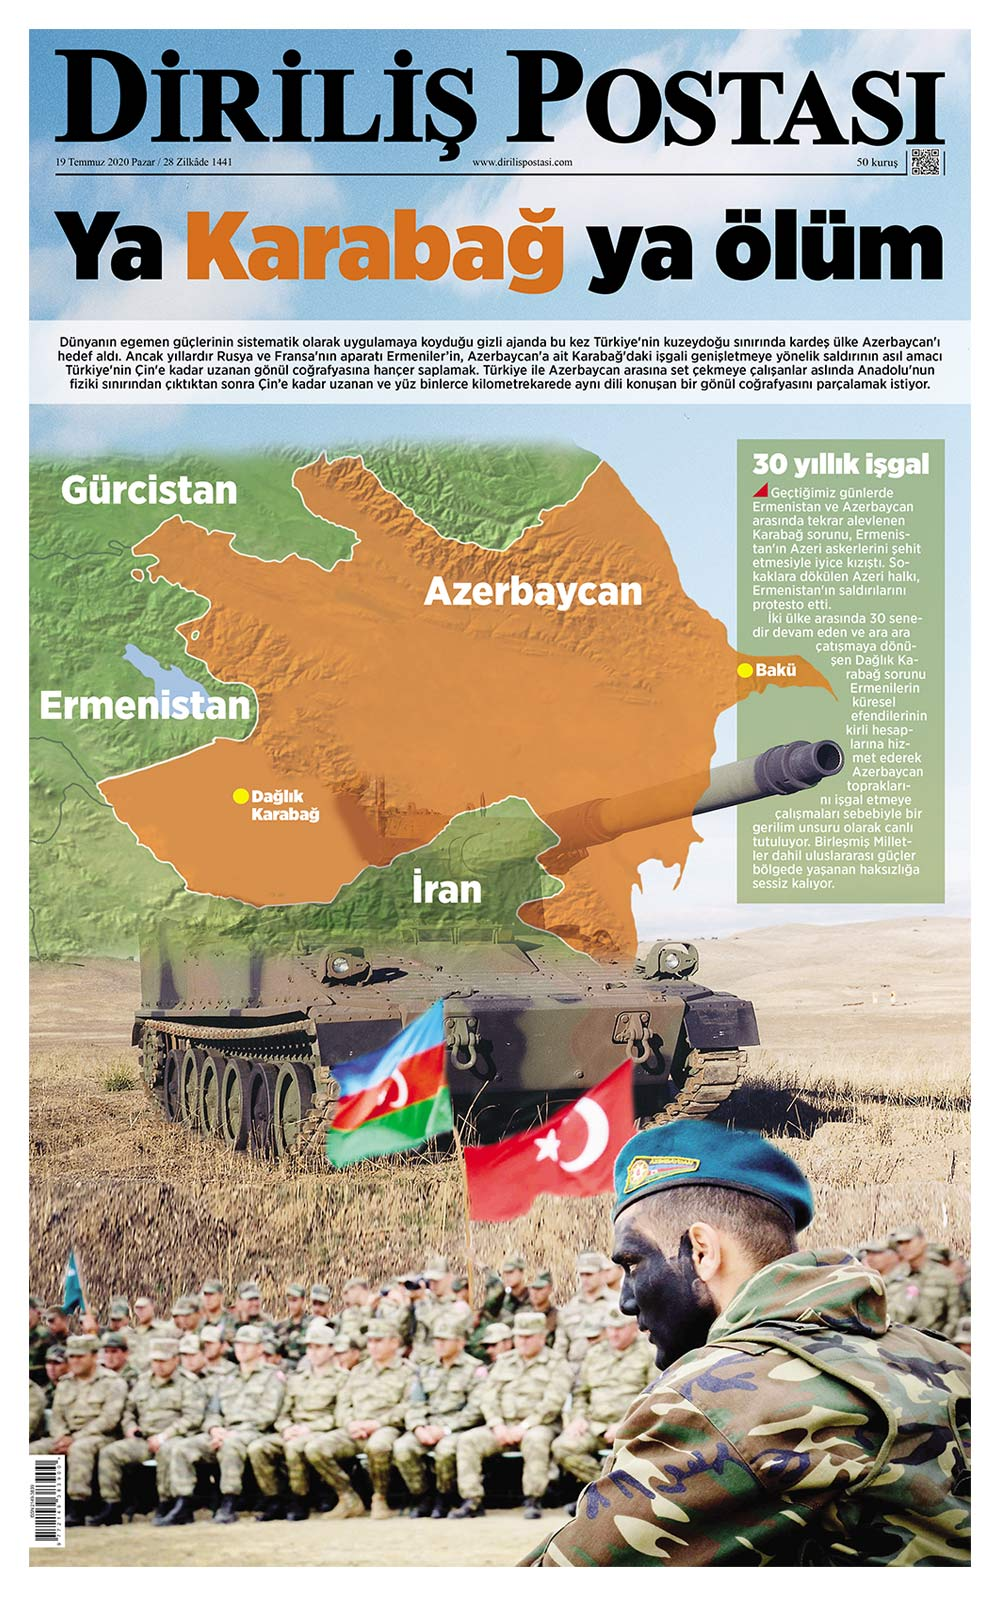 Explained: Why Azerbaijan Launched Attack On Armenia, History Of Conflict, English News